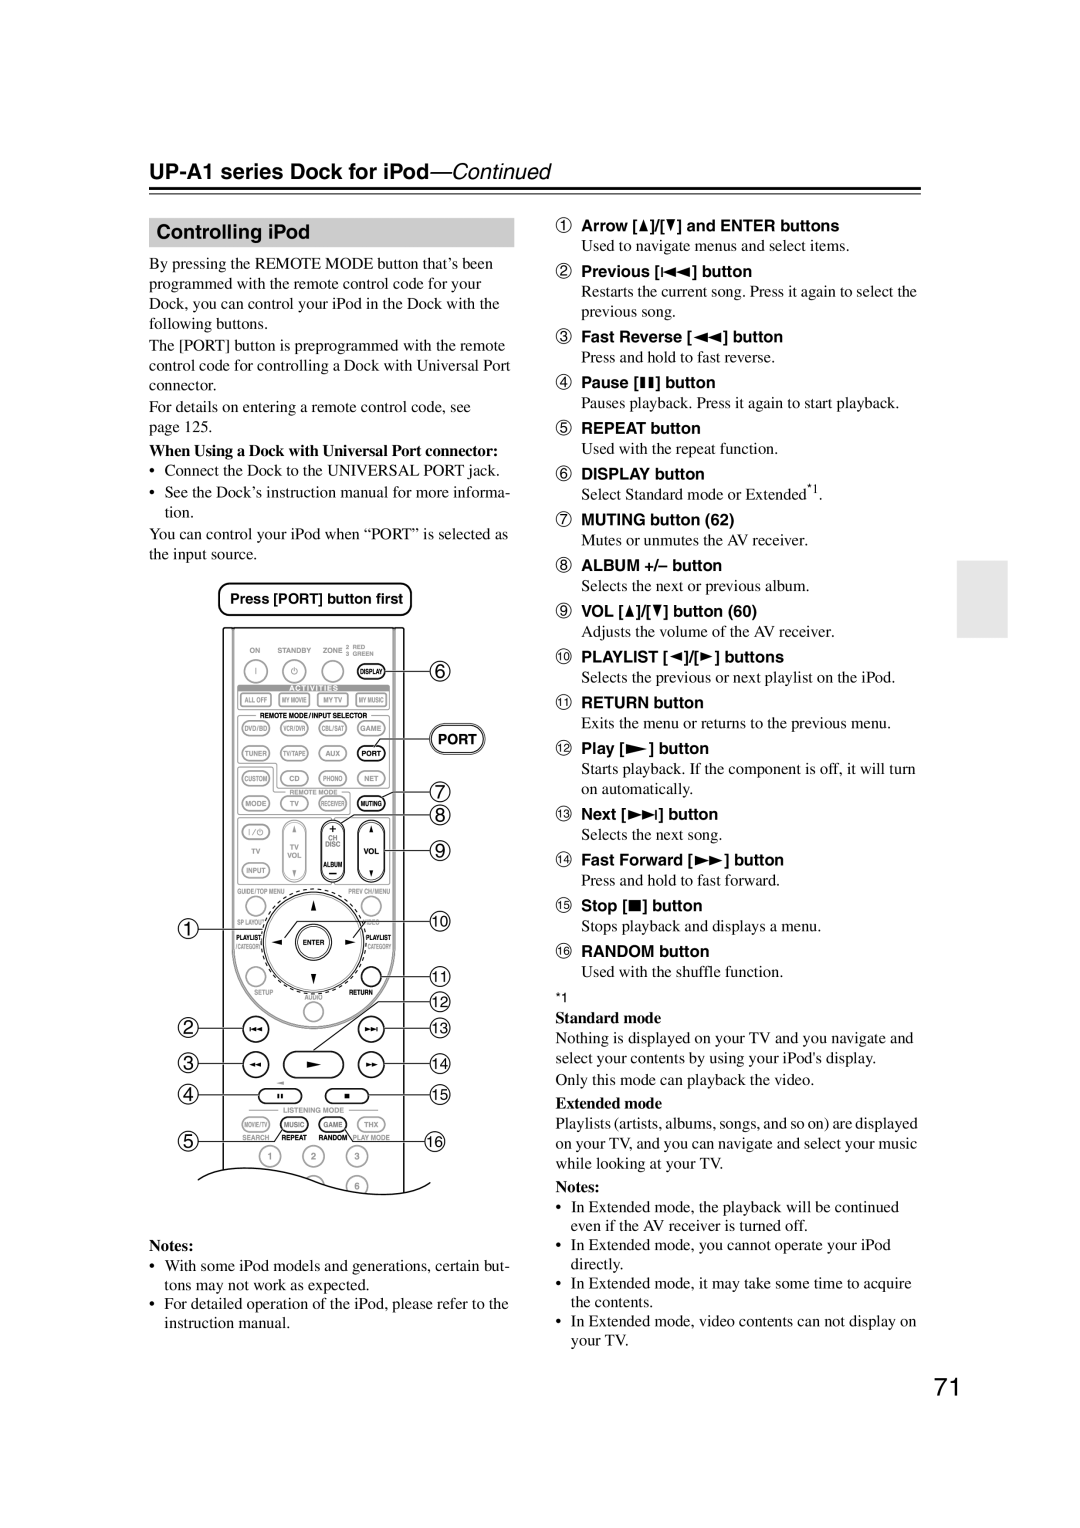 Onkyo TX-NR807, 29400021, HT-RC180 instruction manual UP-A1series Dock for iPod-Continued 